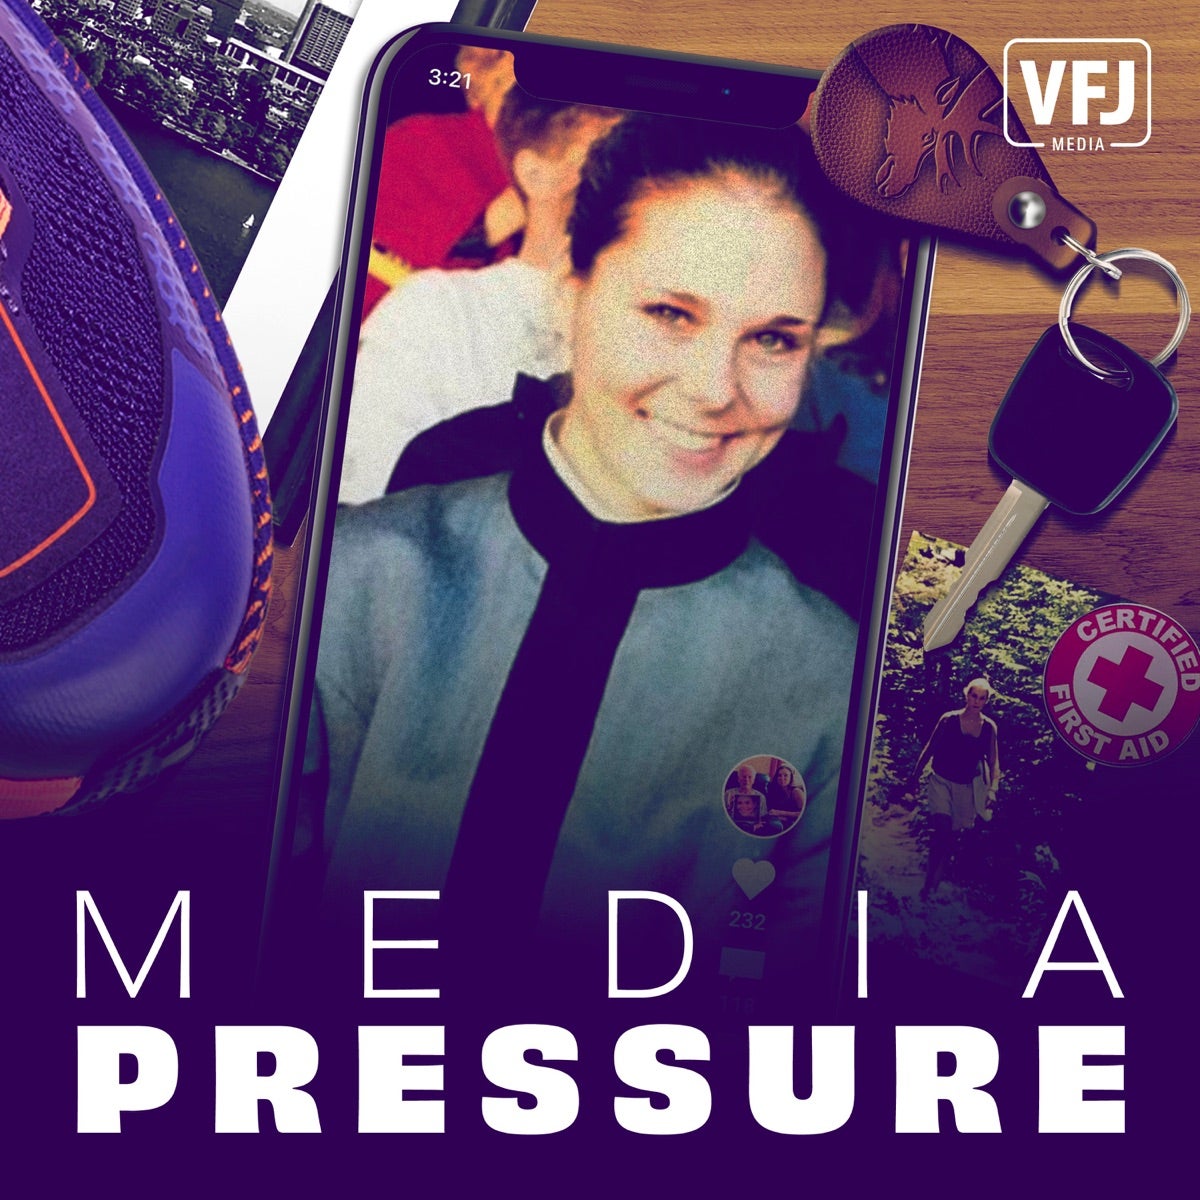 Julie Murray just finished hosting a season of a new podcast called Media Pressure Season 1: The Untold Story of Maura Murray